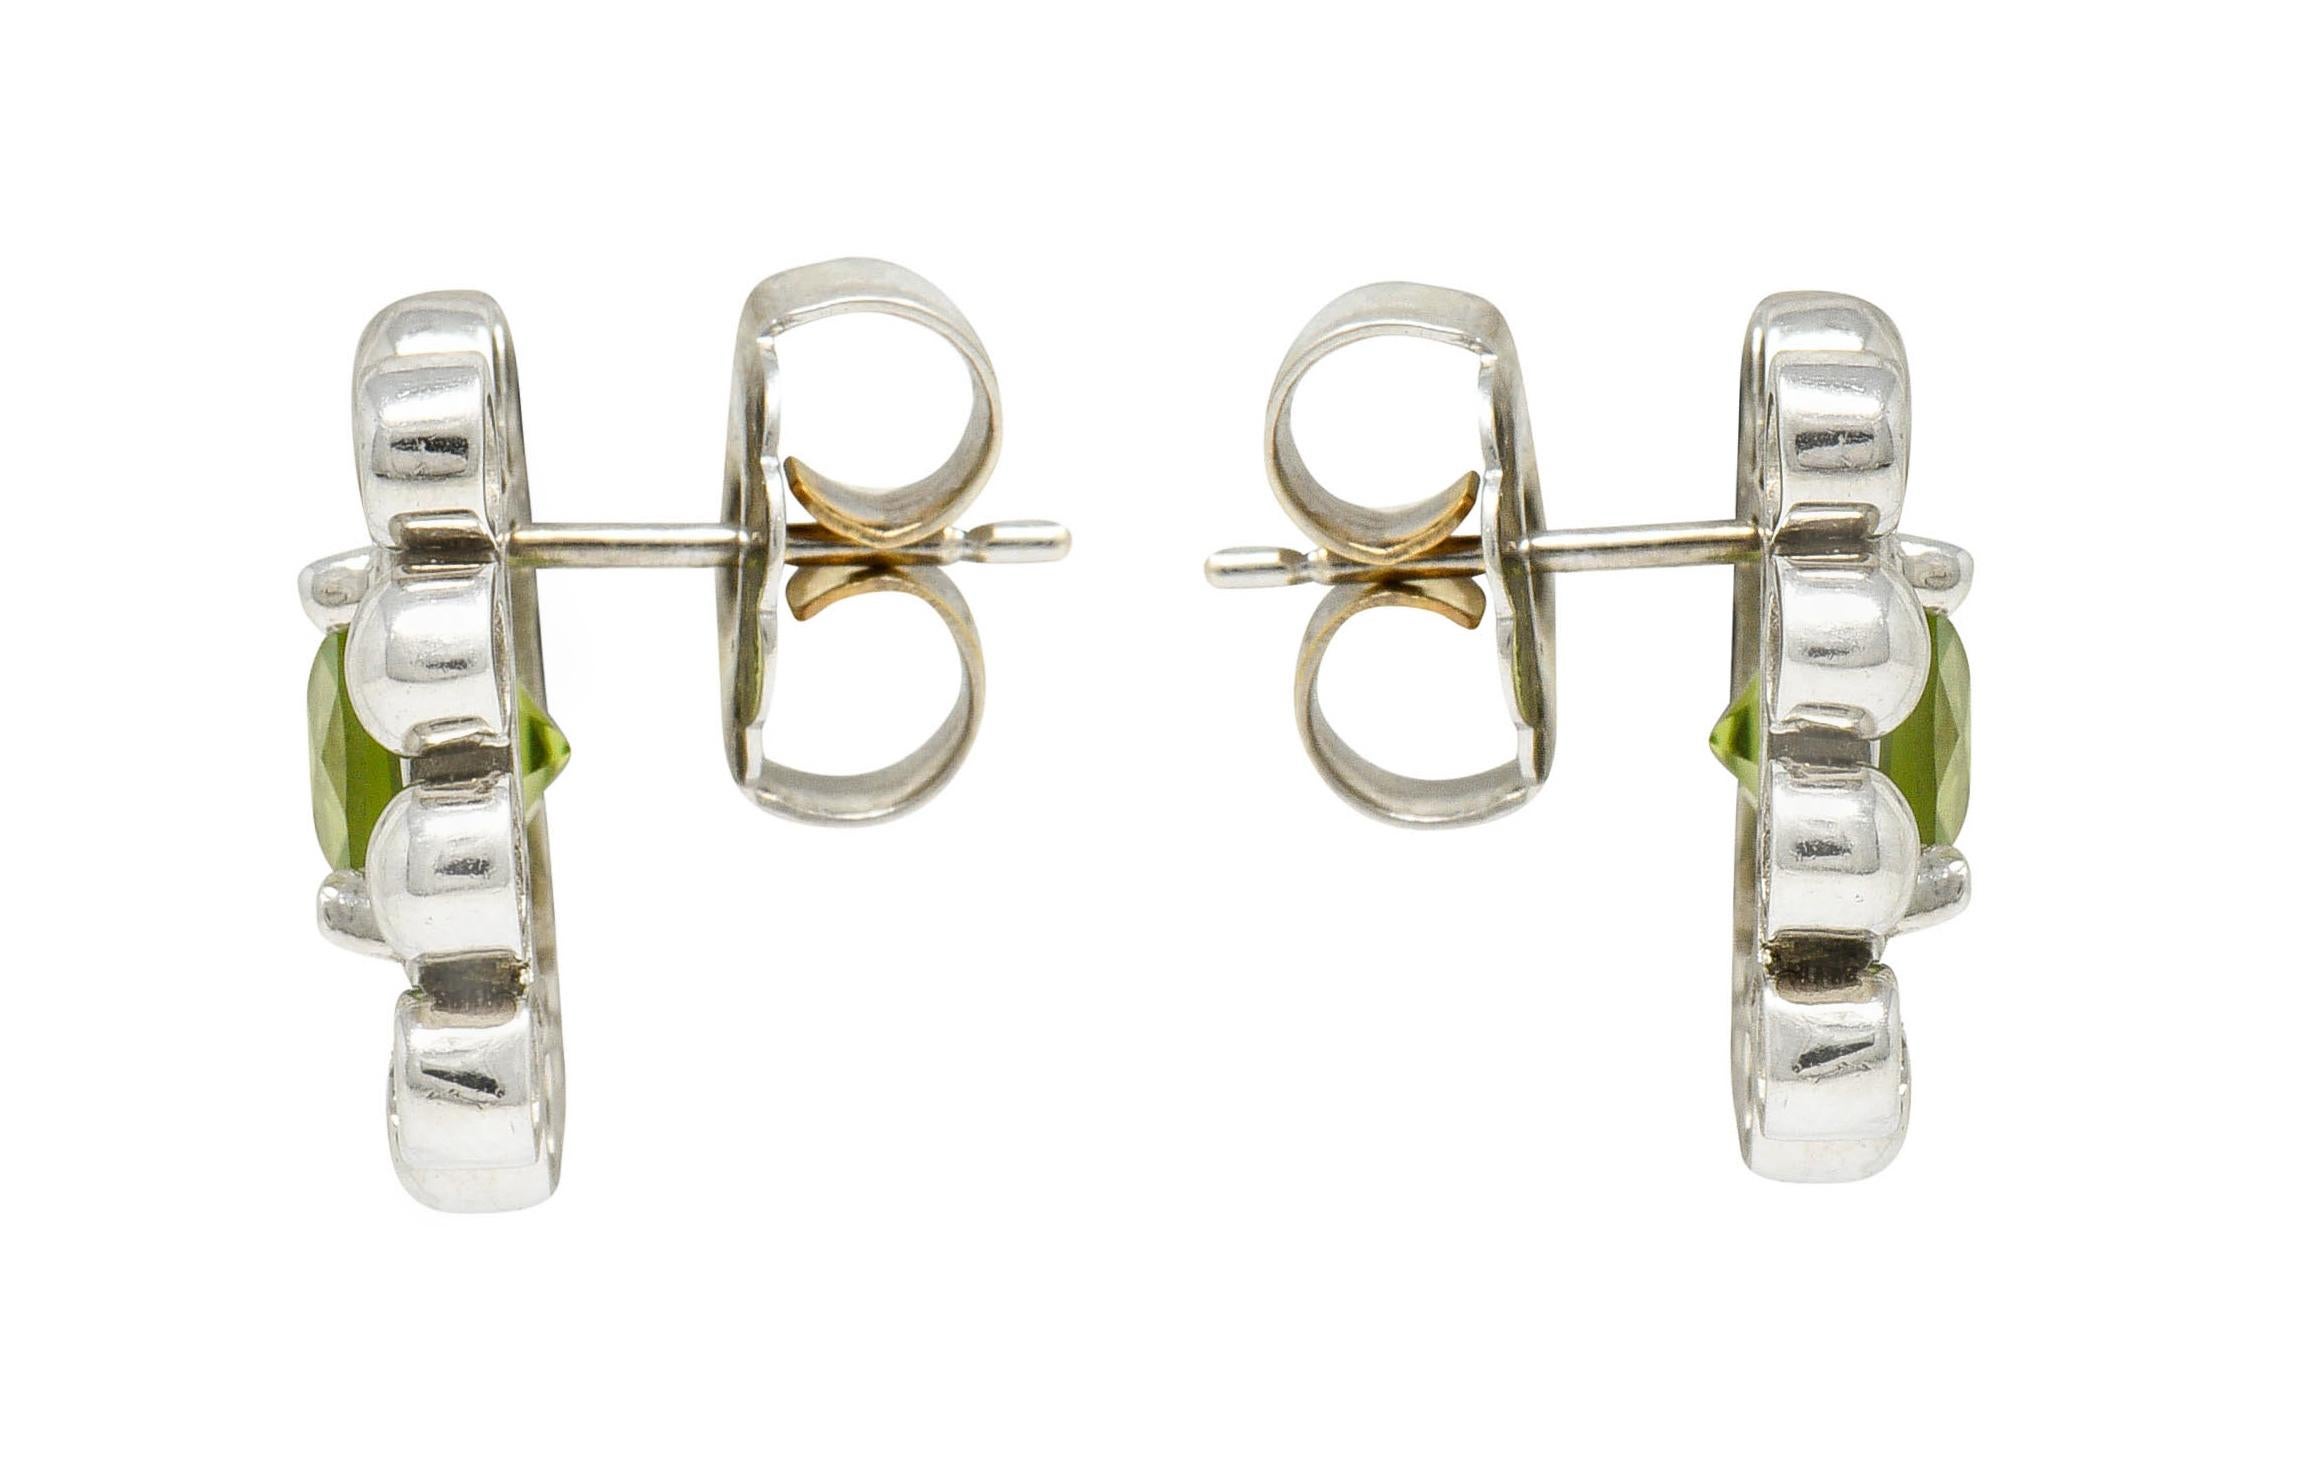 Cluster earrings center cushion cut peridot weighing approximately 3.00 carats

Very well-matched and bright lime green in color

Surrounded by white gold balls and with bezel set round brilliant cut diamonds at each corner

Total diamond weight is